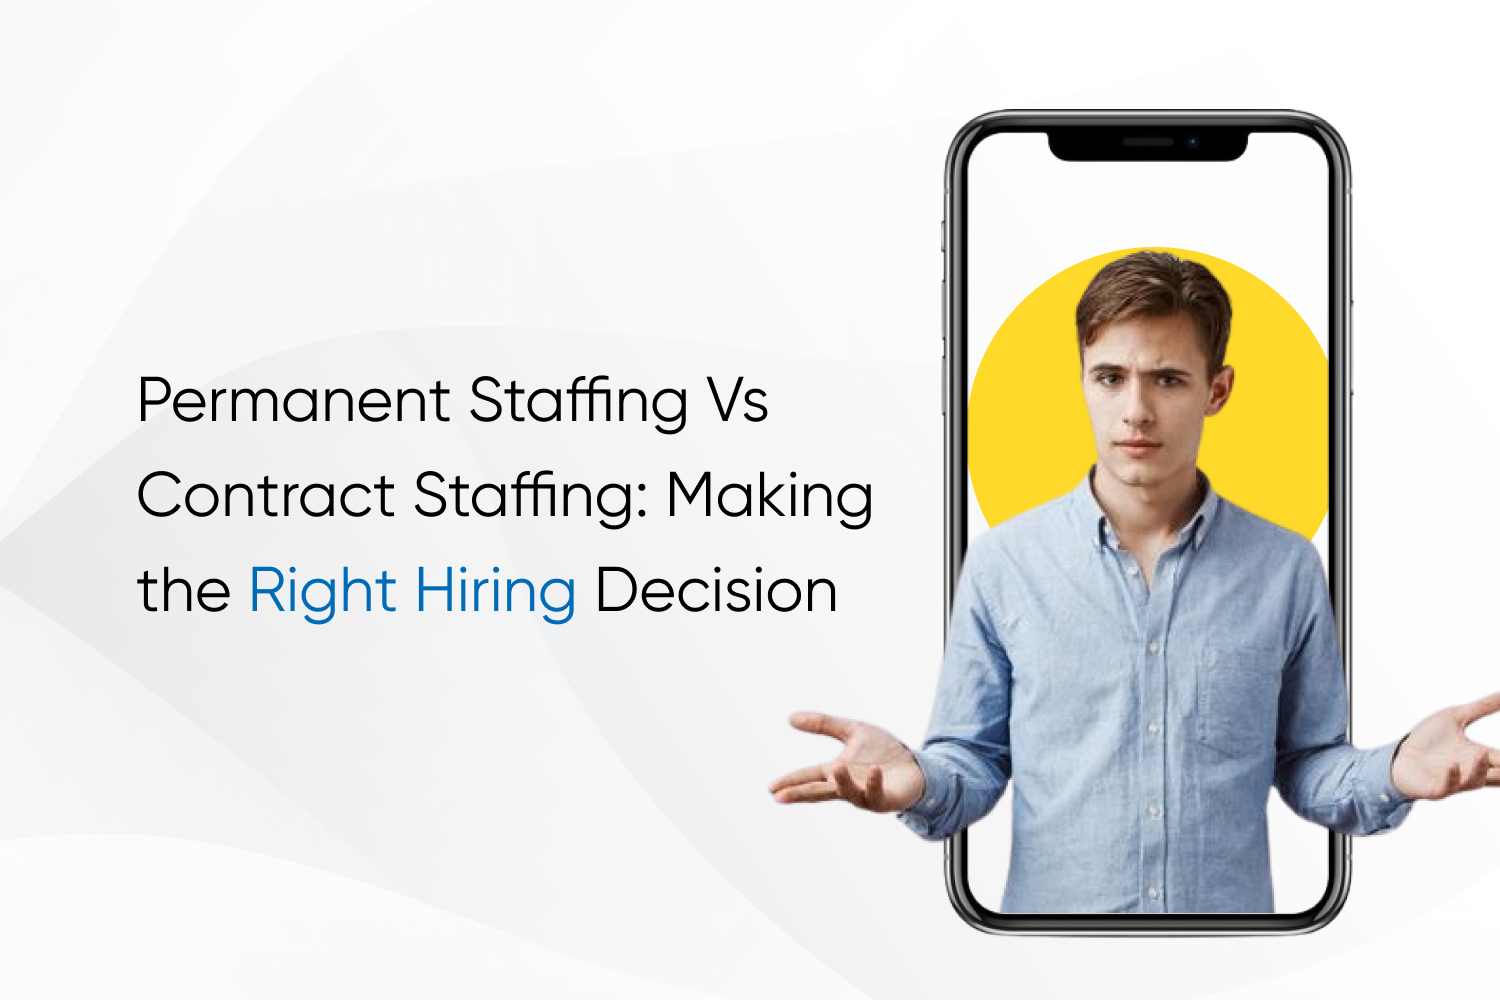 Permanent staffing VS Contract staffing: making the right decision